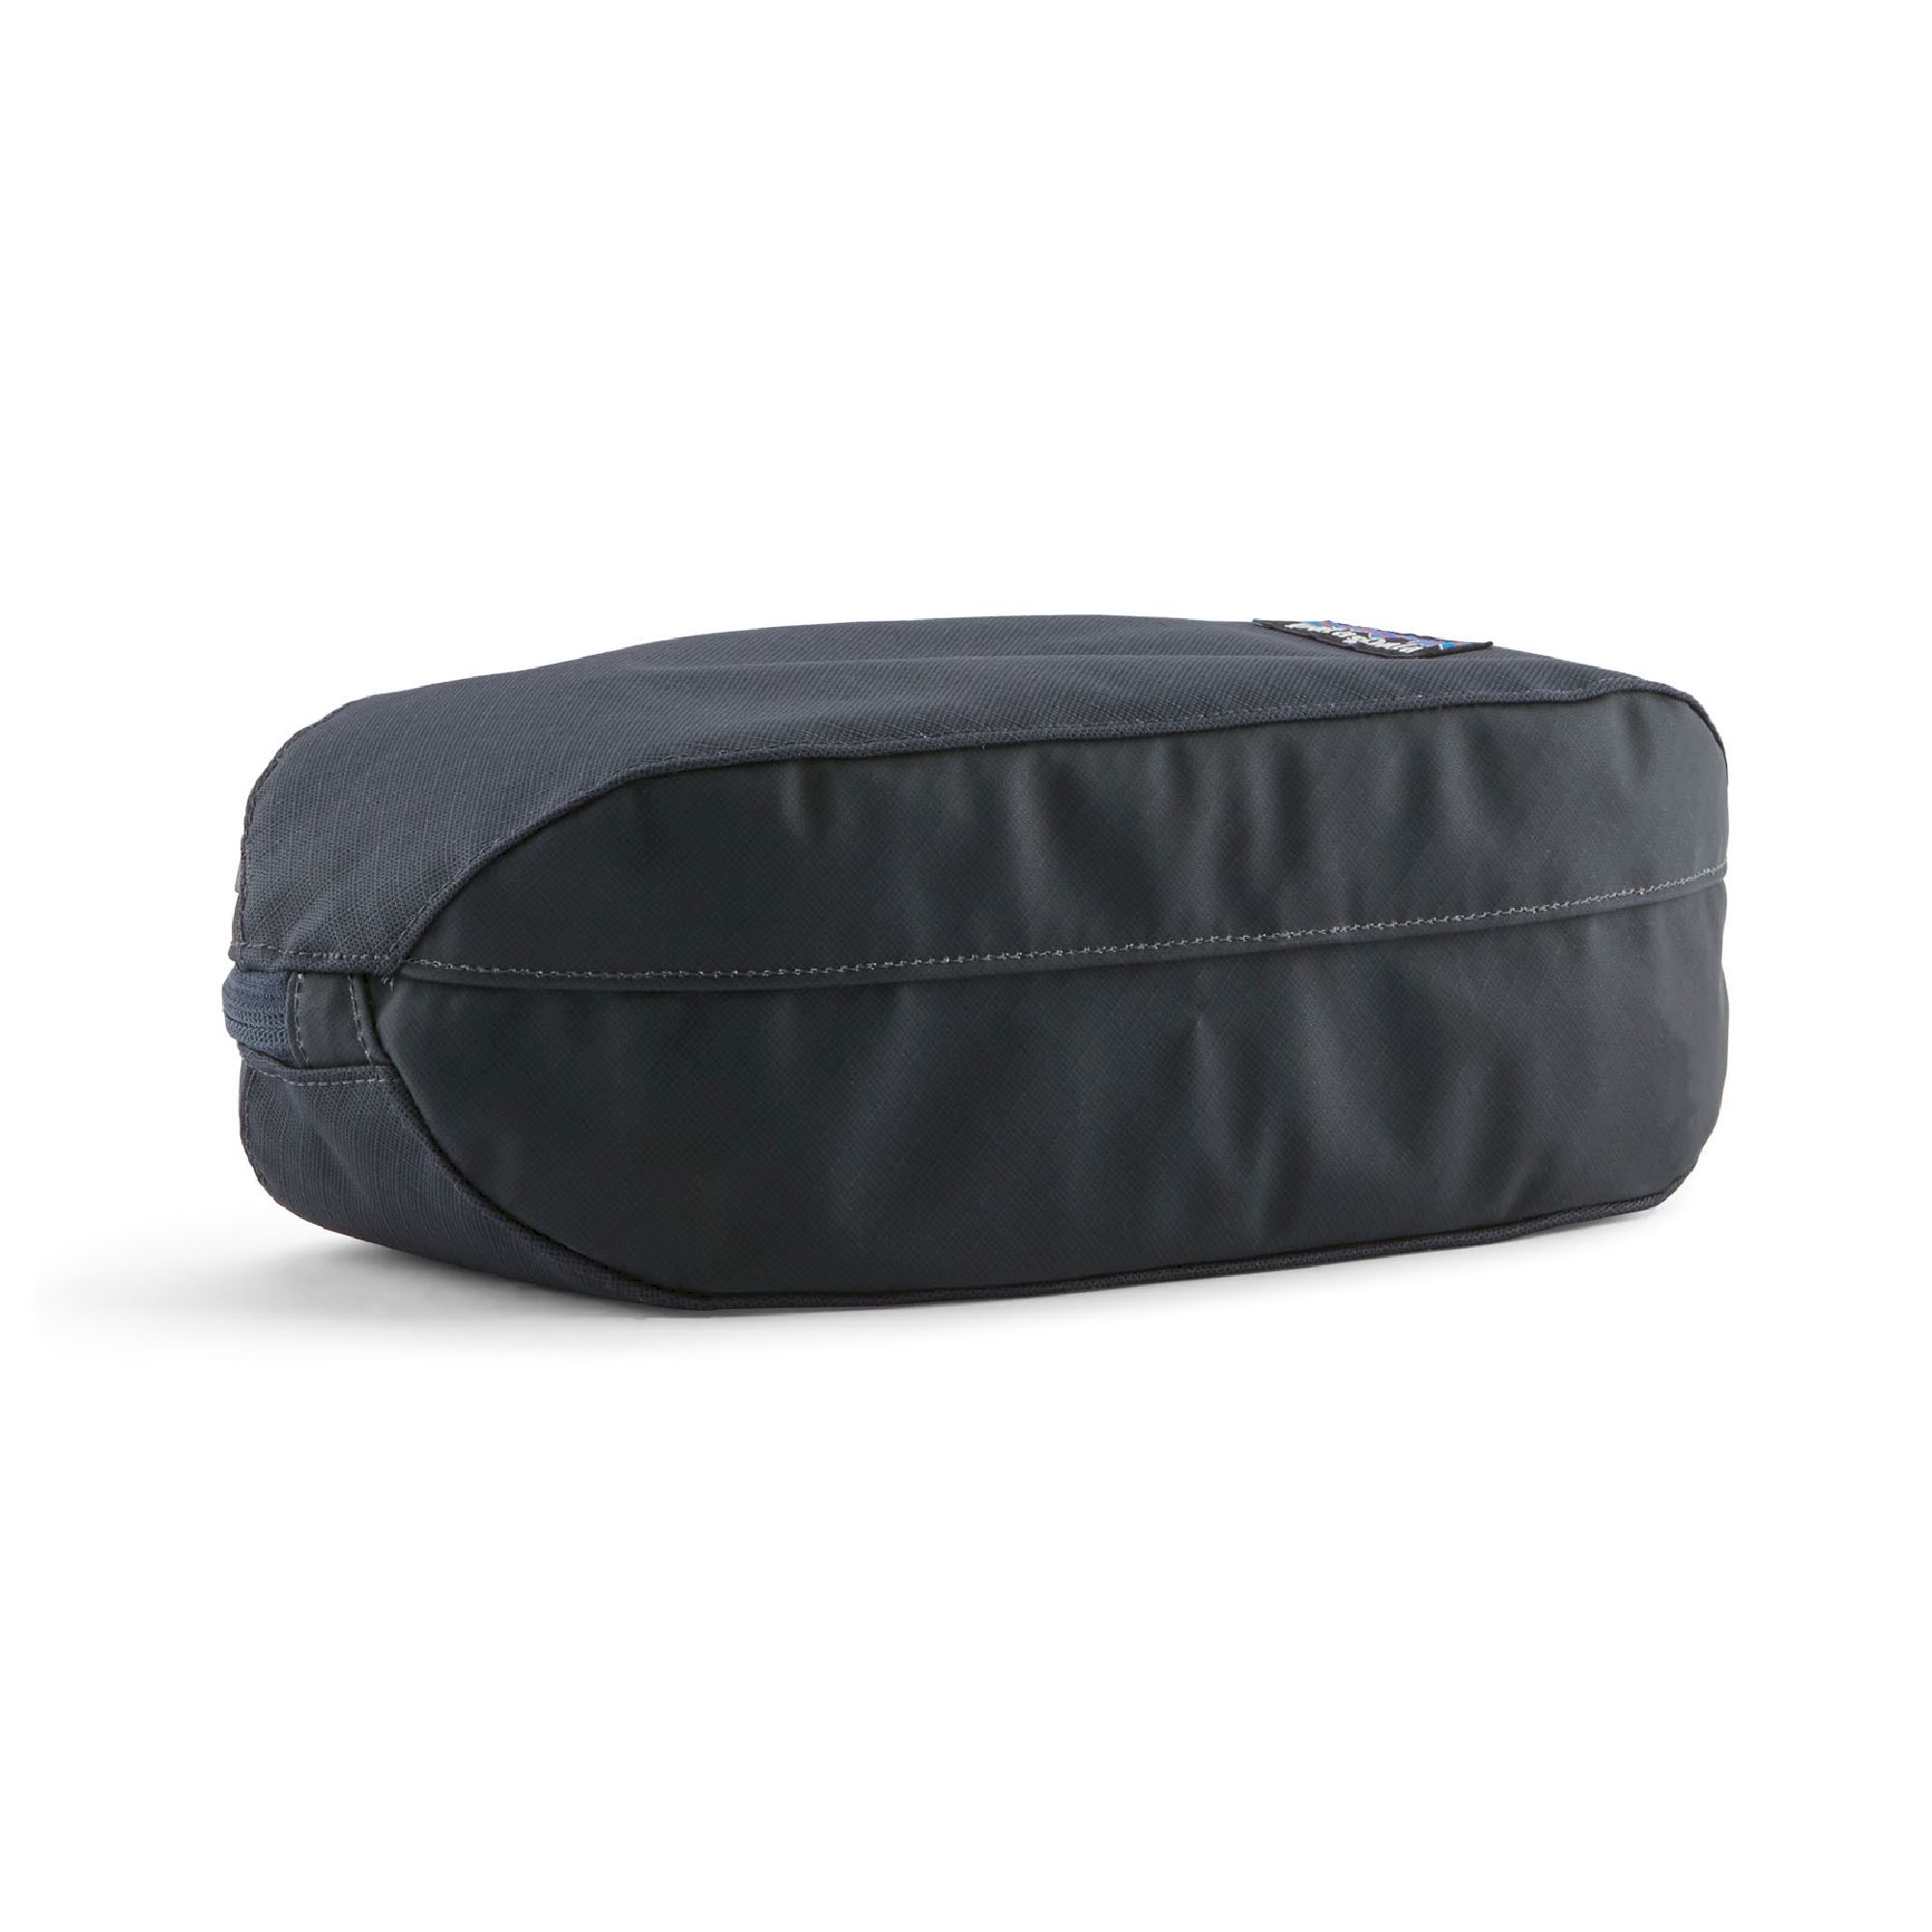 Patagonia Black Hole Cube - Small - Packing cubes | Hardloop